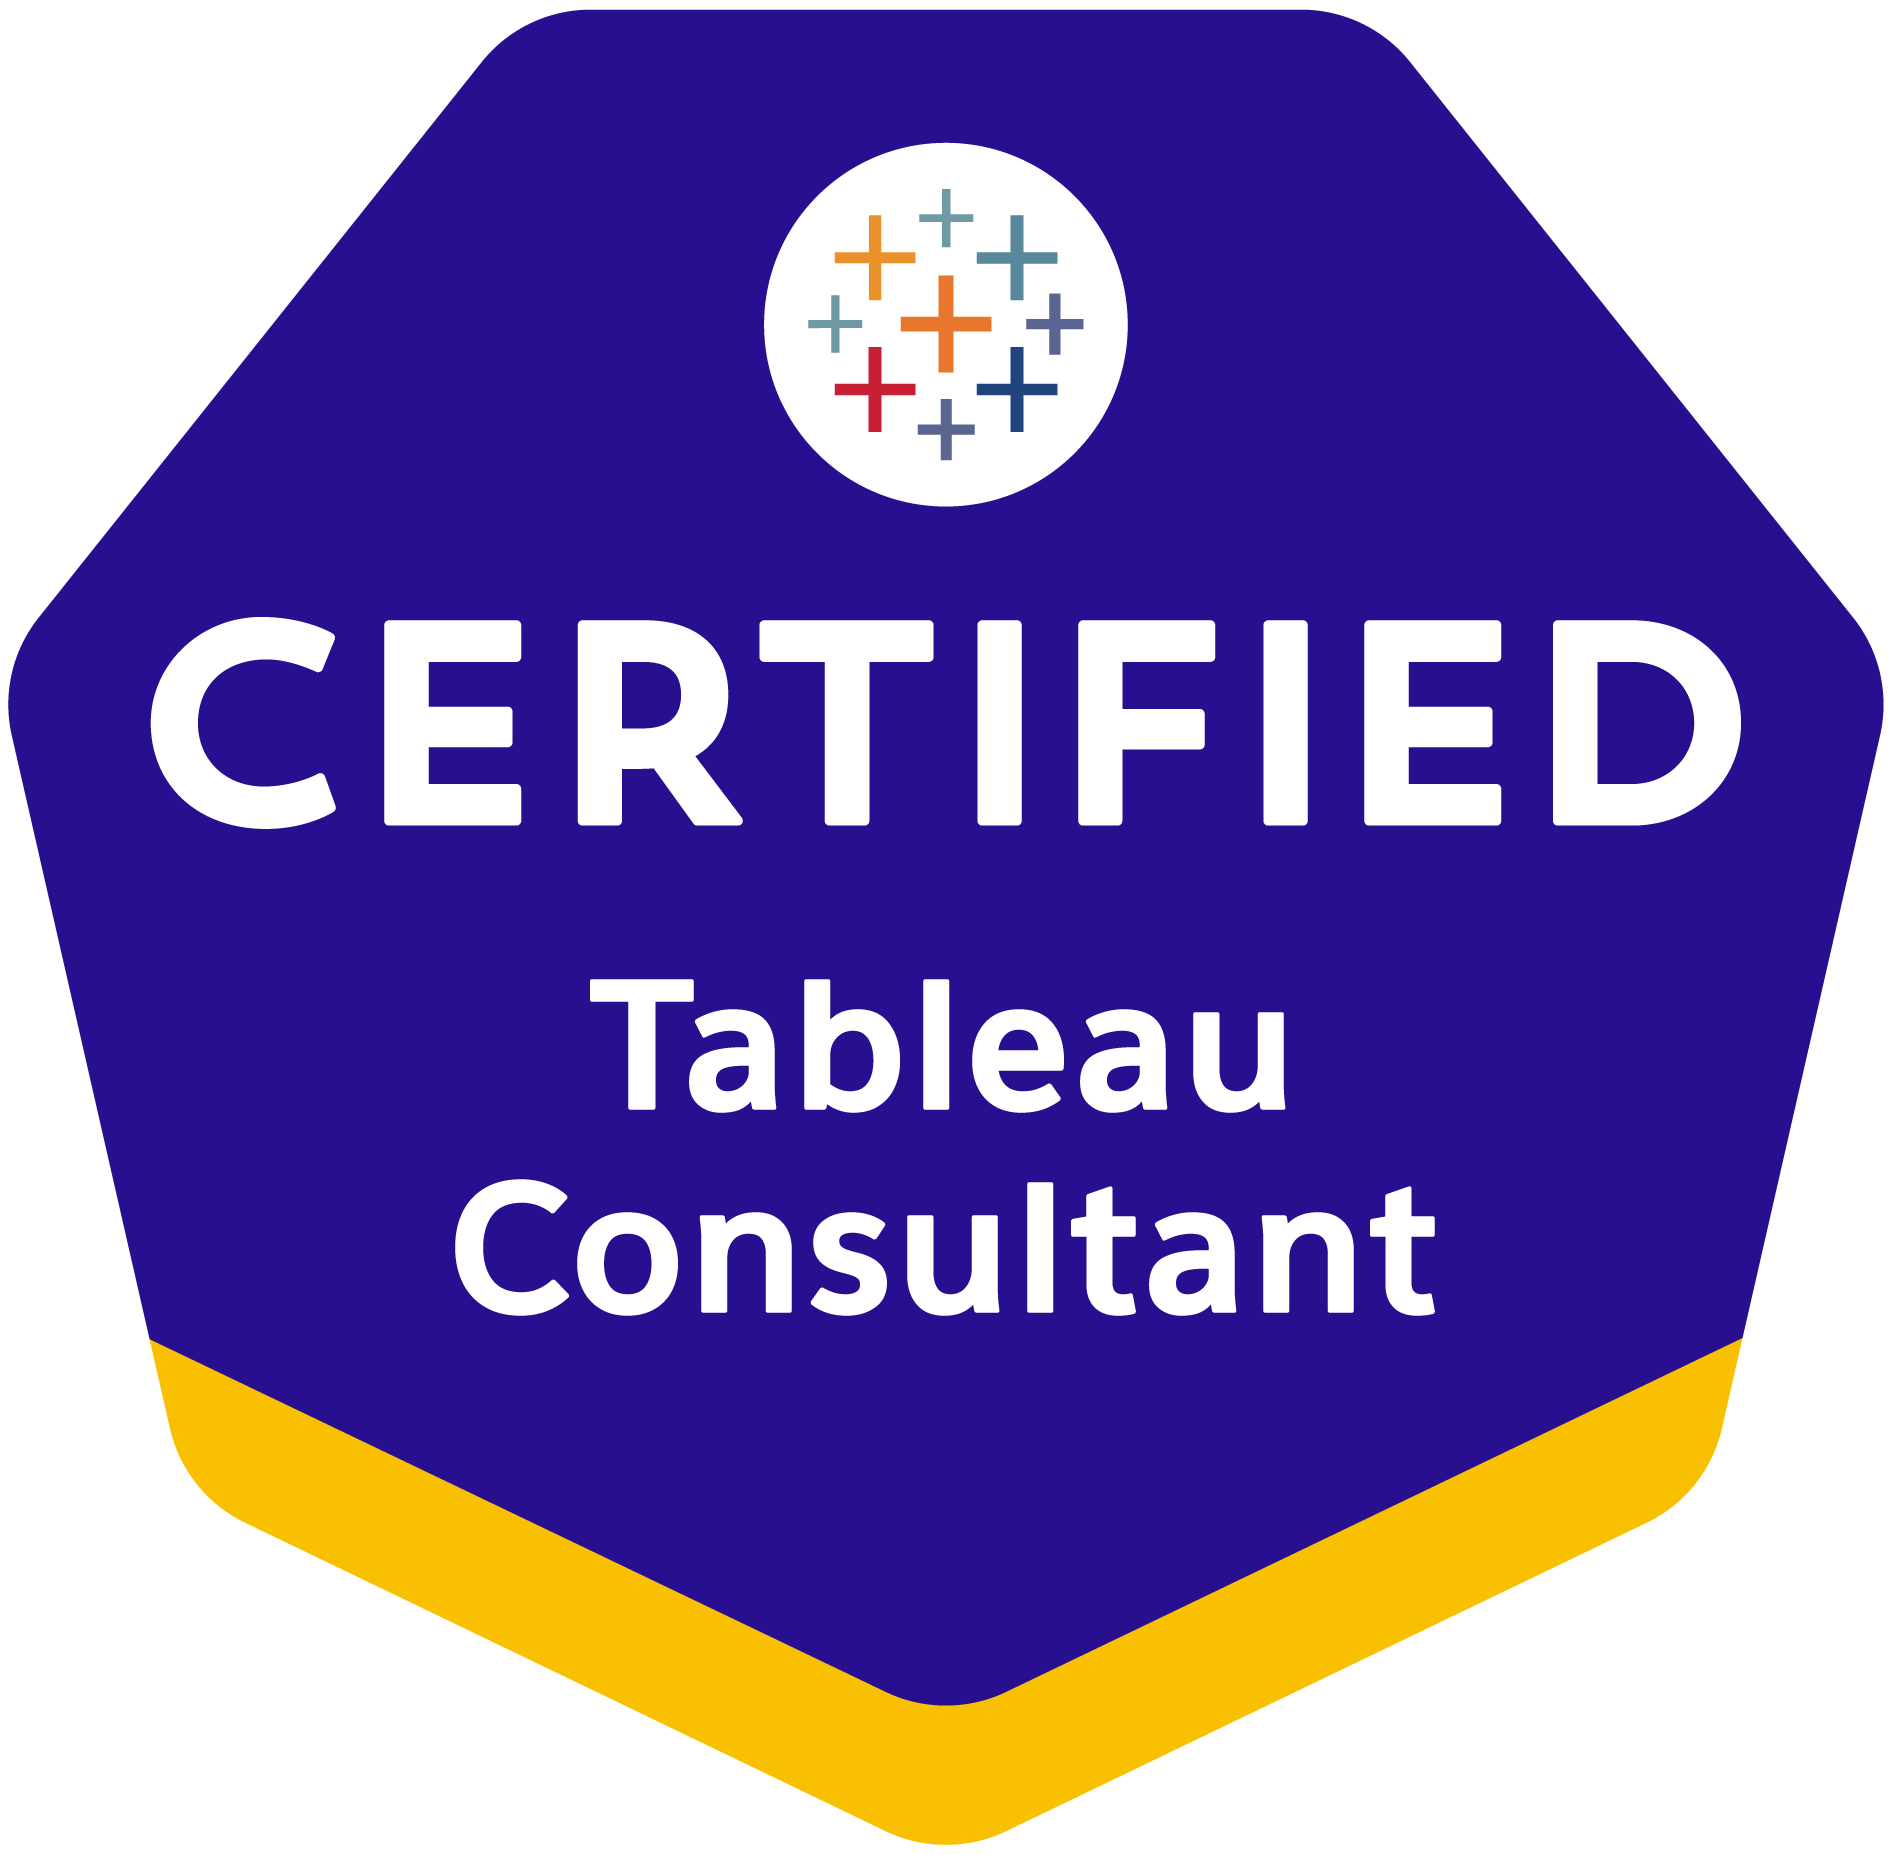 Tableau Consultant に移動